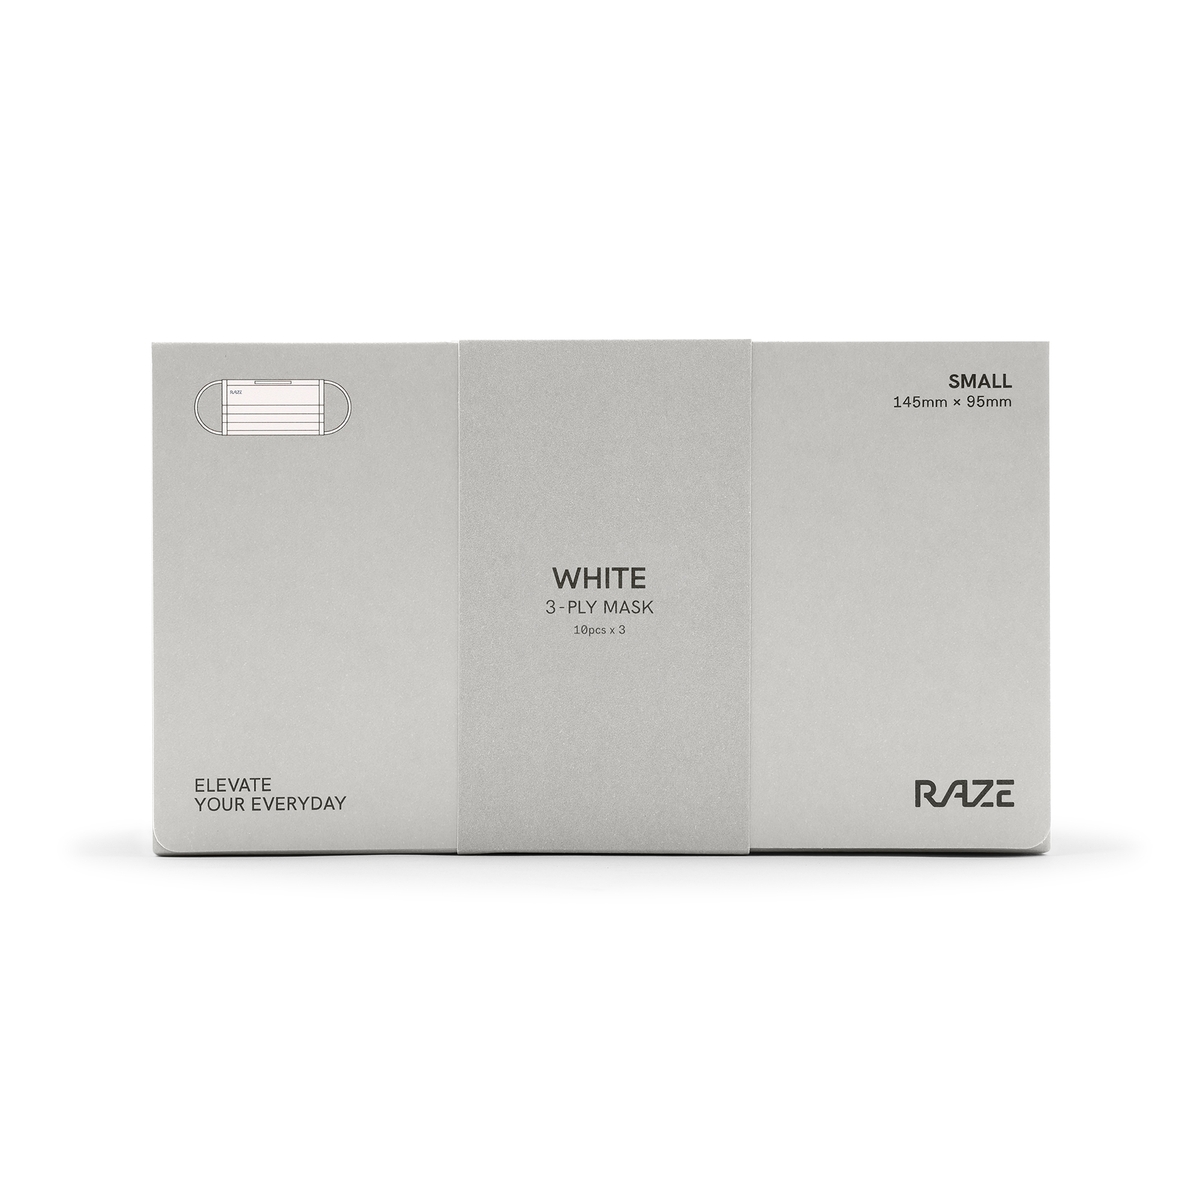 White 3-Ply Mask Small